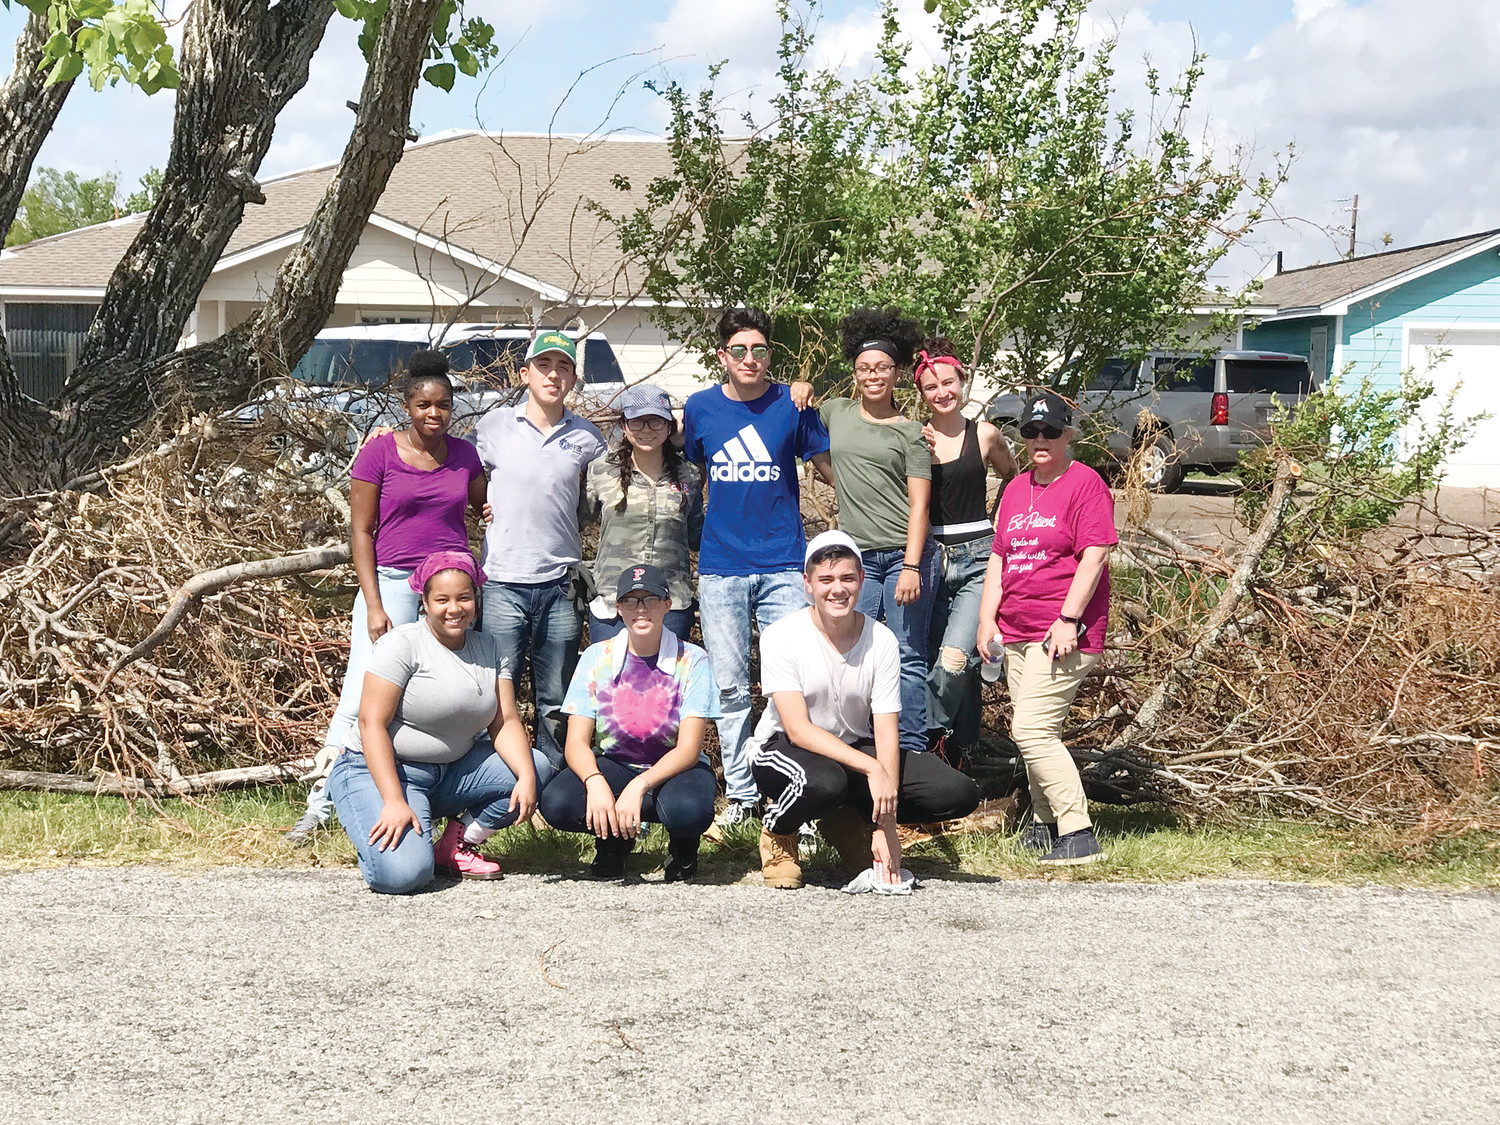 Eight St. Patrick Academy seniors joined volunteers coordinated by the Diocese of Corpus Christi during a recent service trip to participate in cleanup efforts following Hurricane Harvey. Pastor Father James Ruggieri and Director of Campus Ministry Mary Cipriano also joined them on the trip.